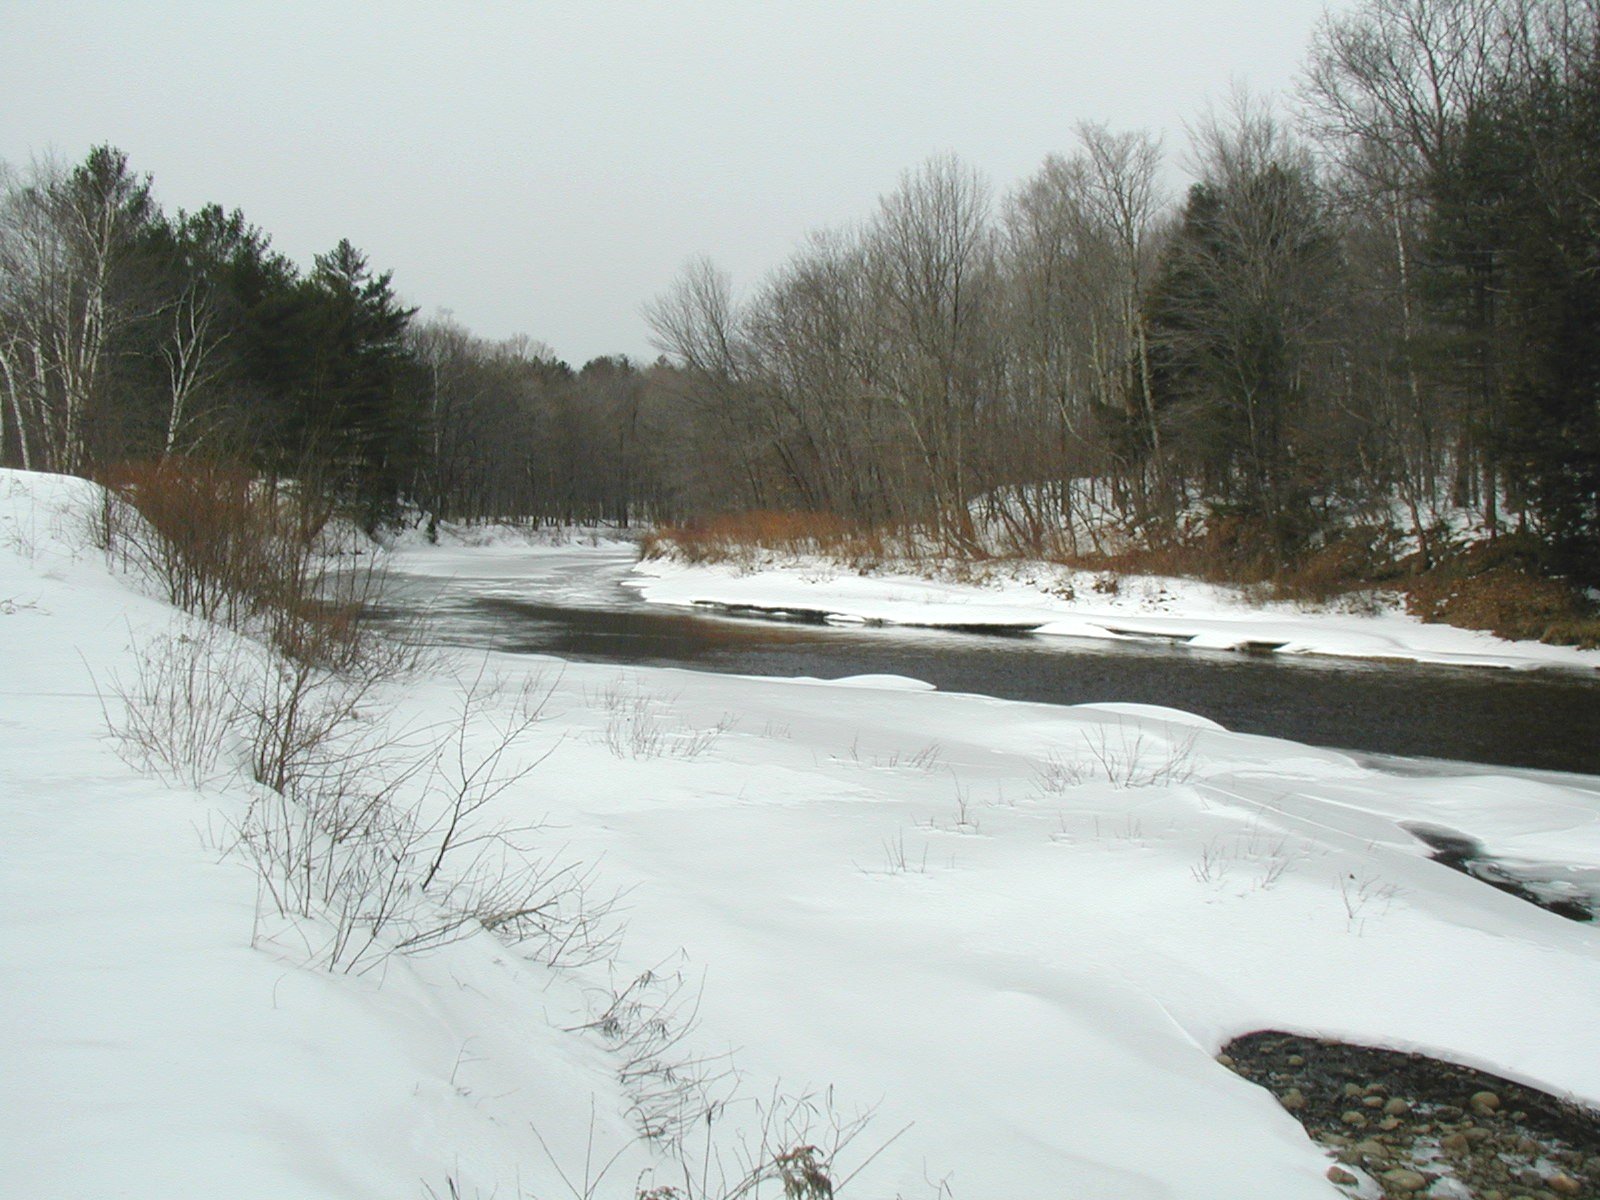 Photograph of the Baker River at Rumney, NH (RUMN3)